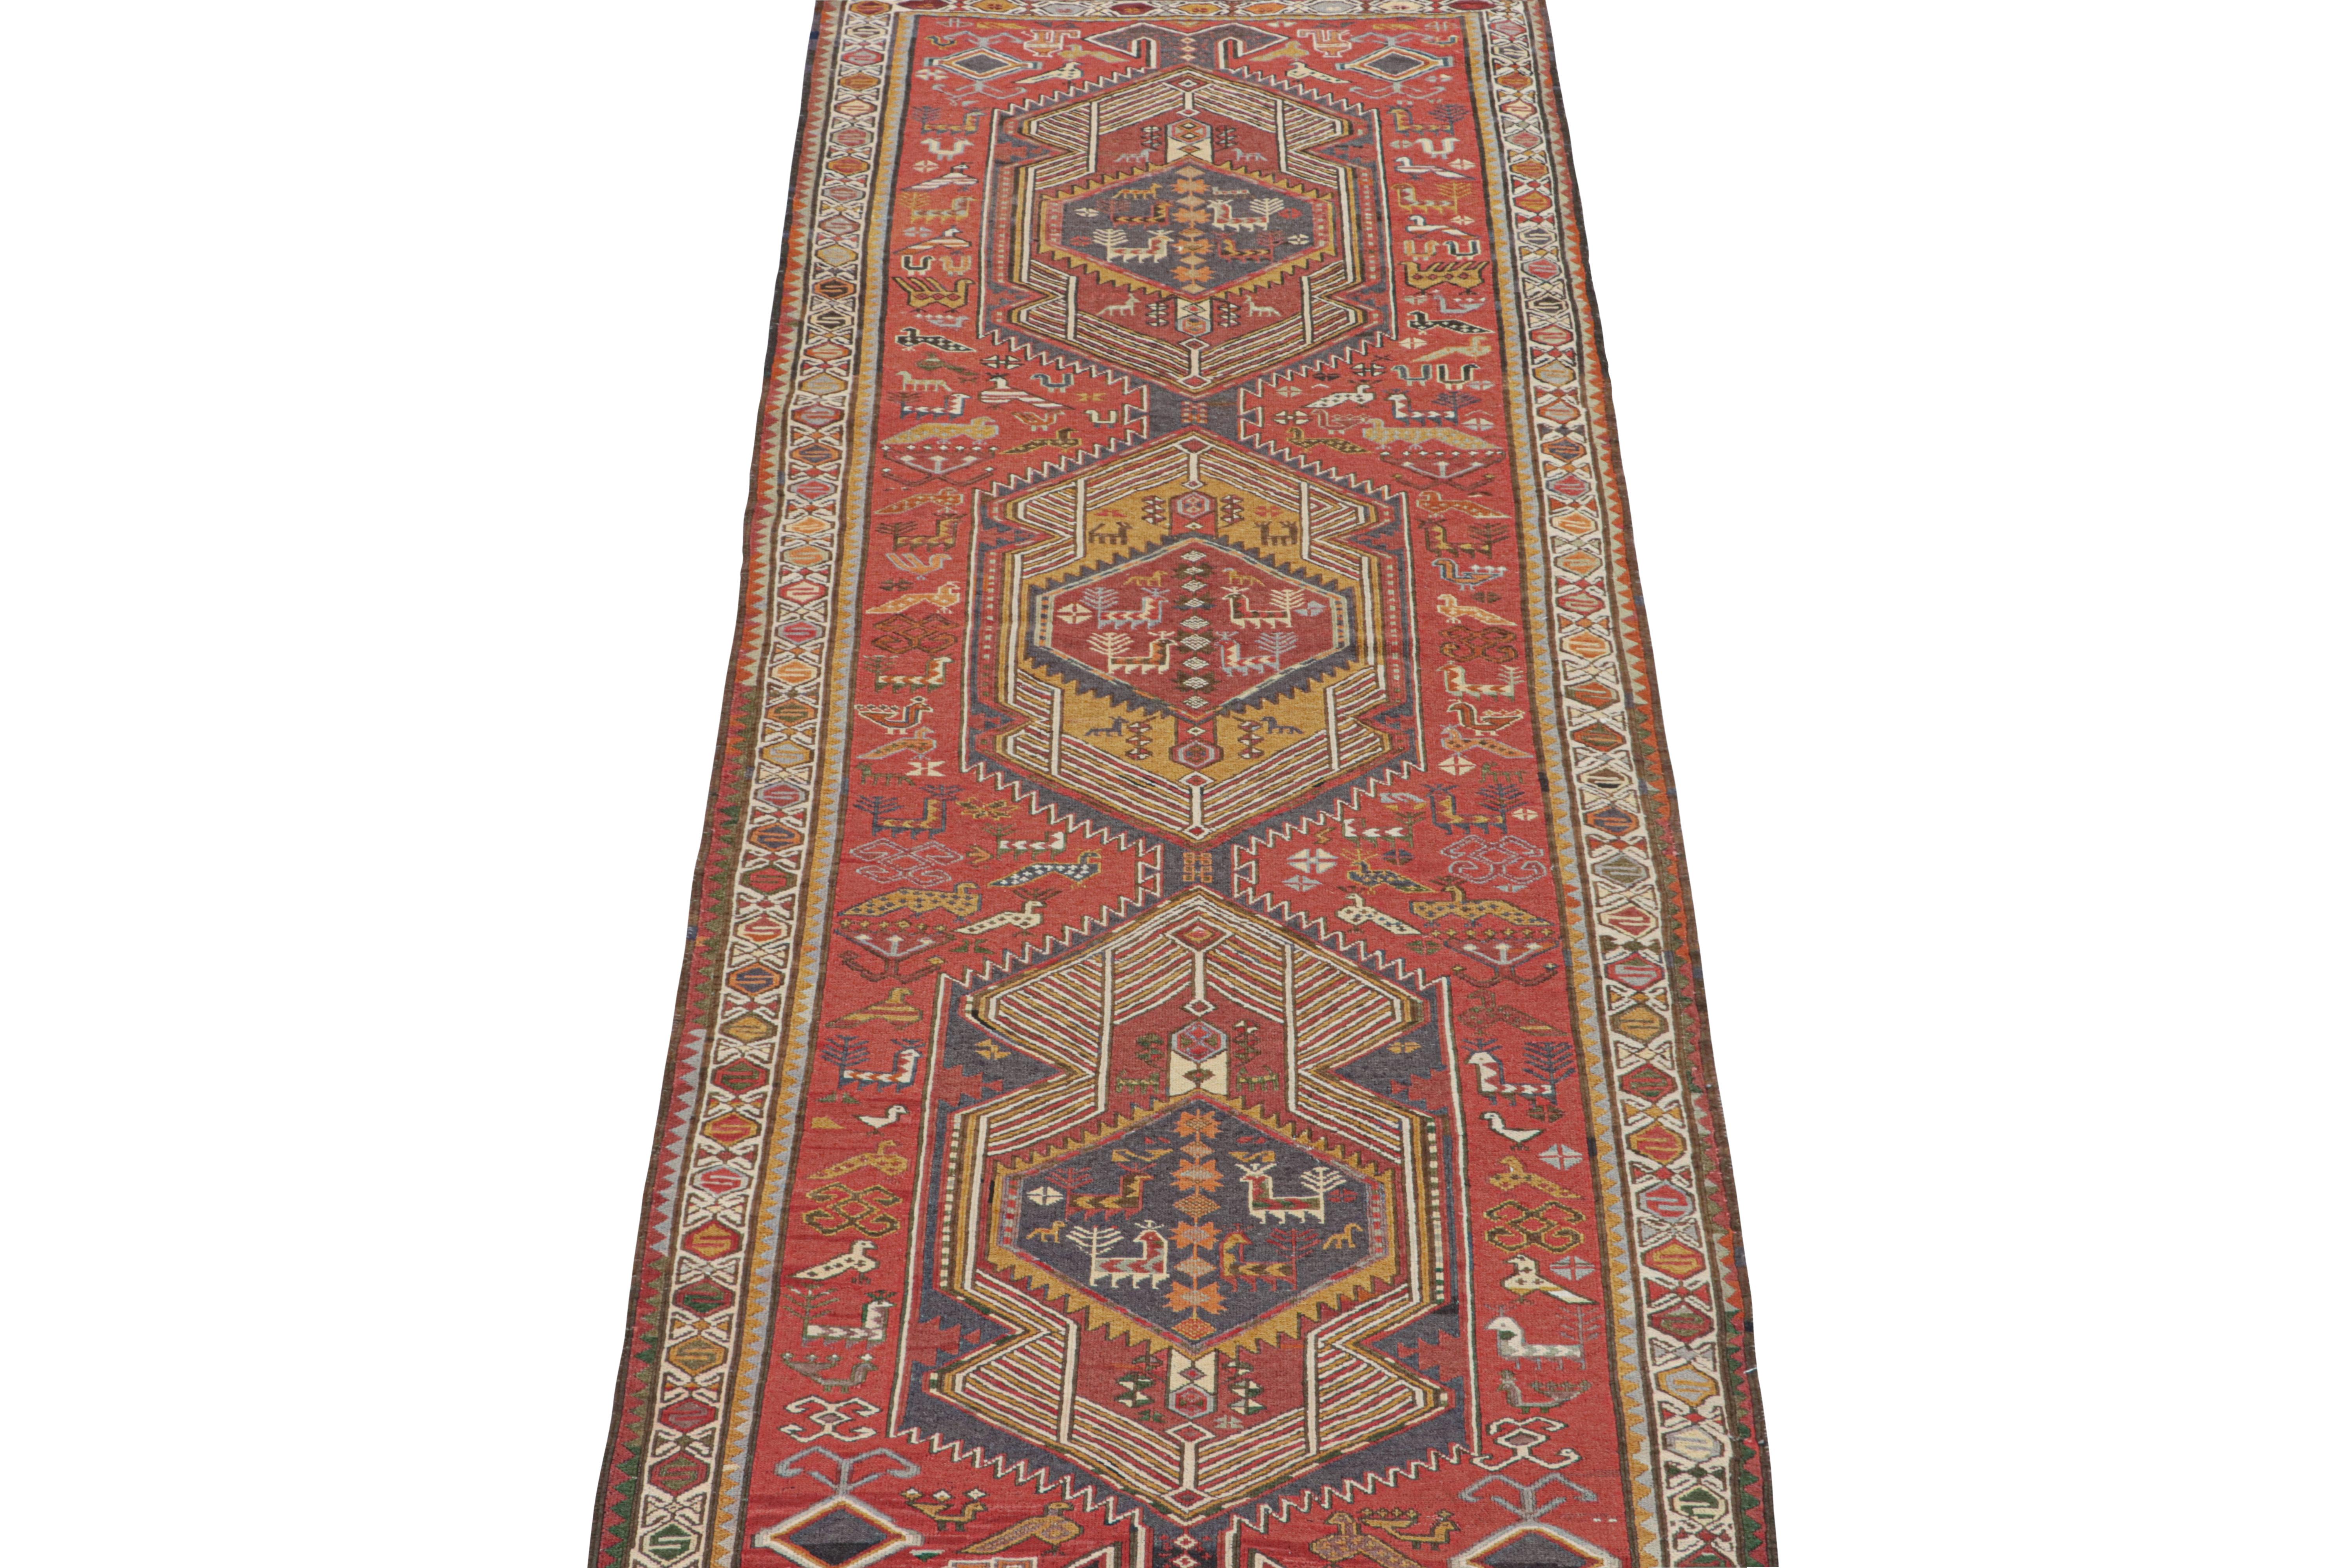 This vintage 3x9 Persian Kilim is believed to be a tribal runner of the 1950s. 

Handwoven in wool, its design plays medallion and all-over pattern style together on a bright red field. The piece further enjoys a wide range of geometric patterns